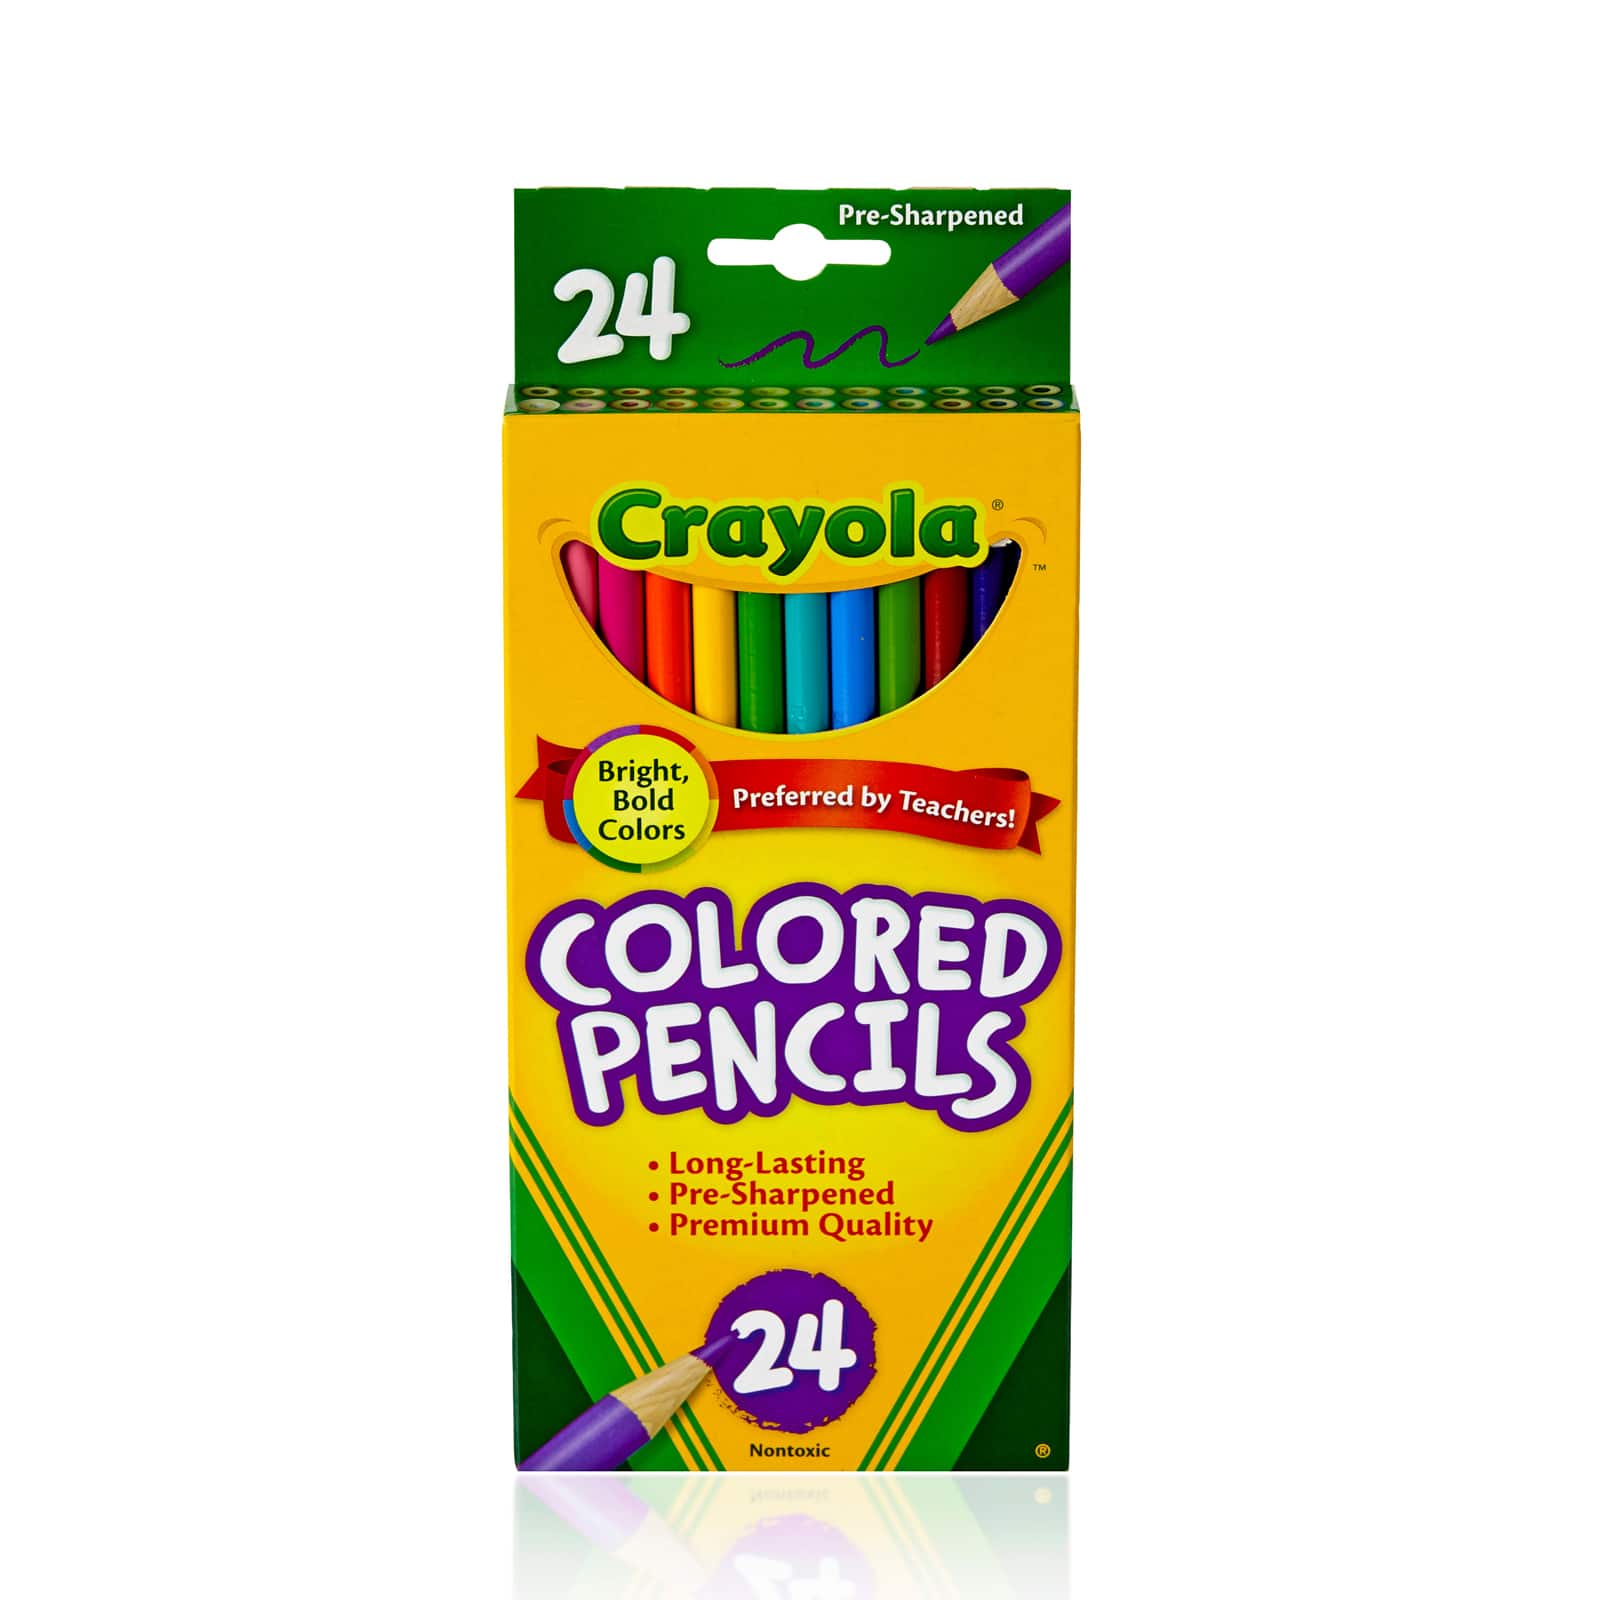 Silky Crayons By Creatology™, 24 Pack